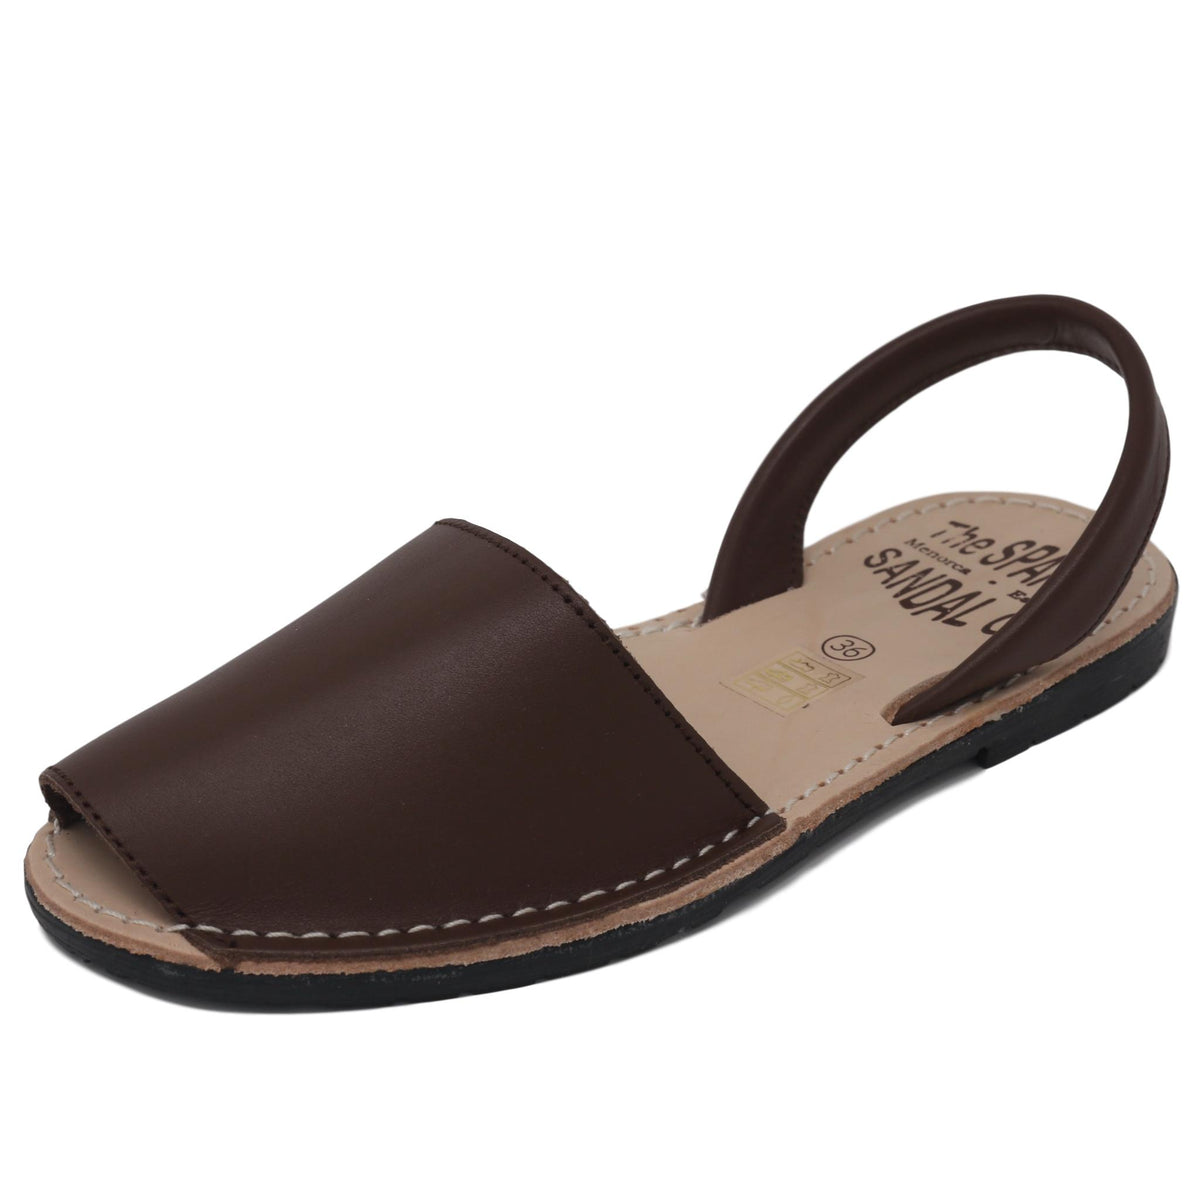 Chocolate brown sandals